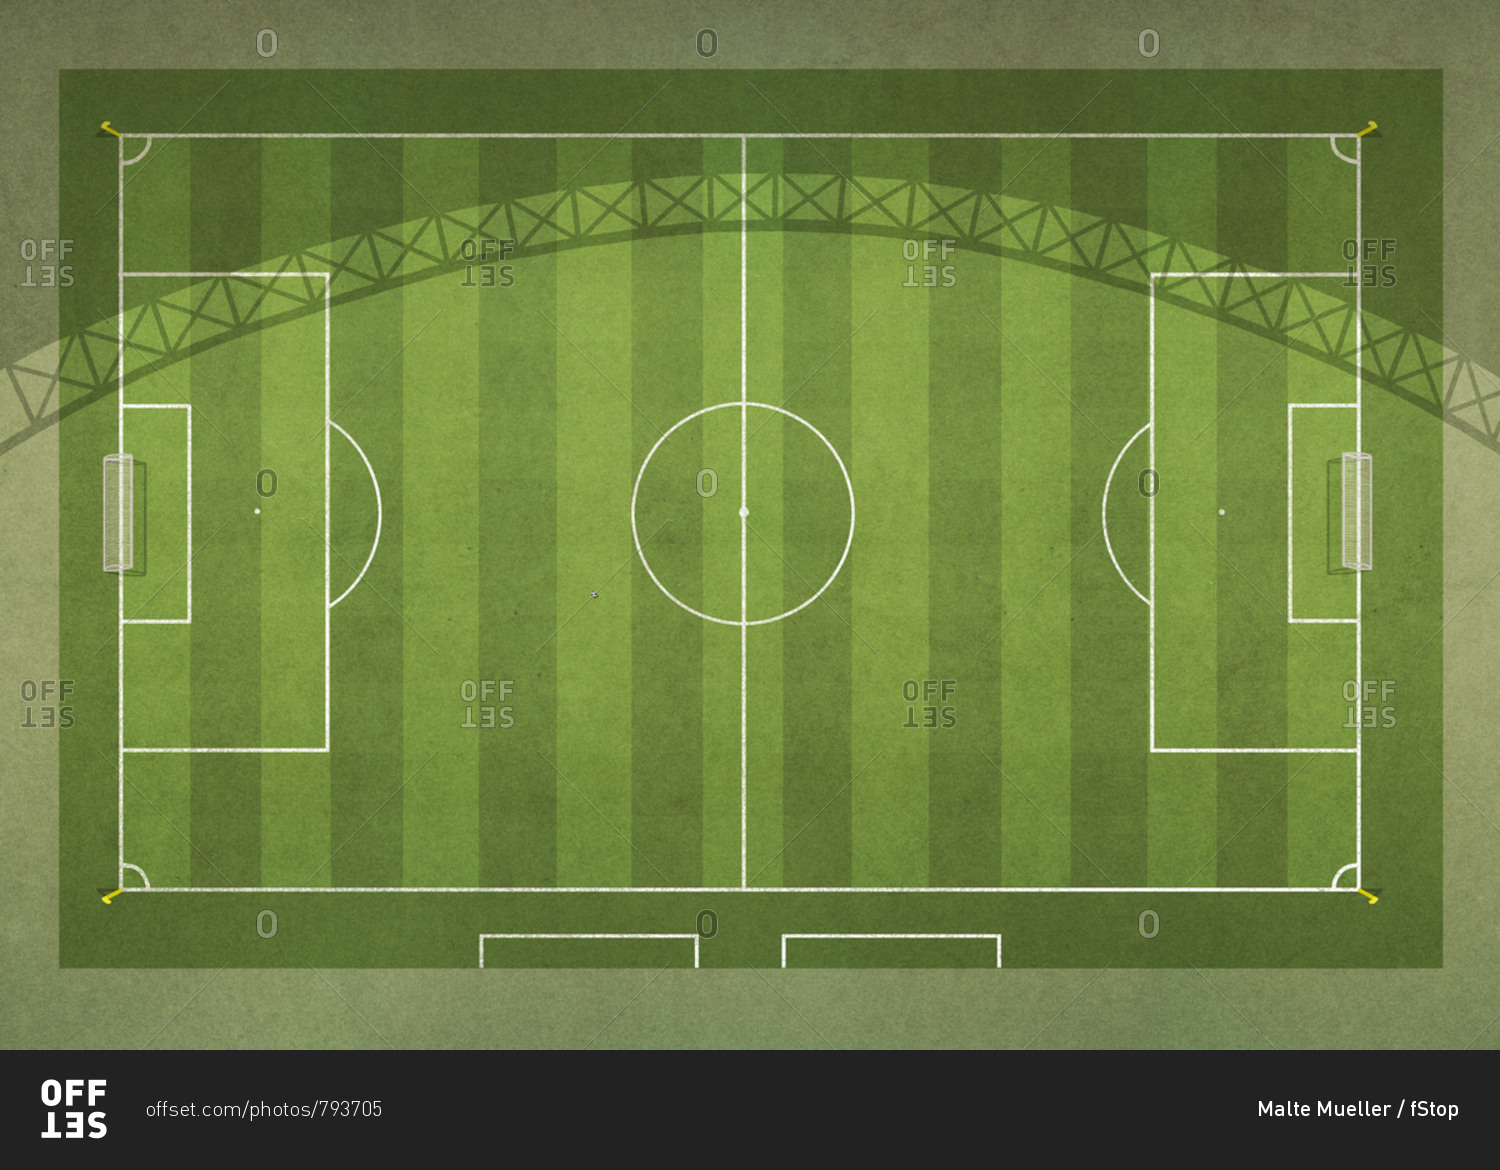 11,055 Mls Soccer Images, Stock Photos, 3D objects, & Vectors